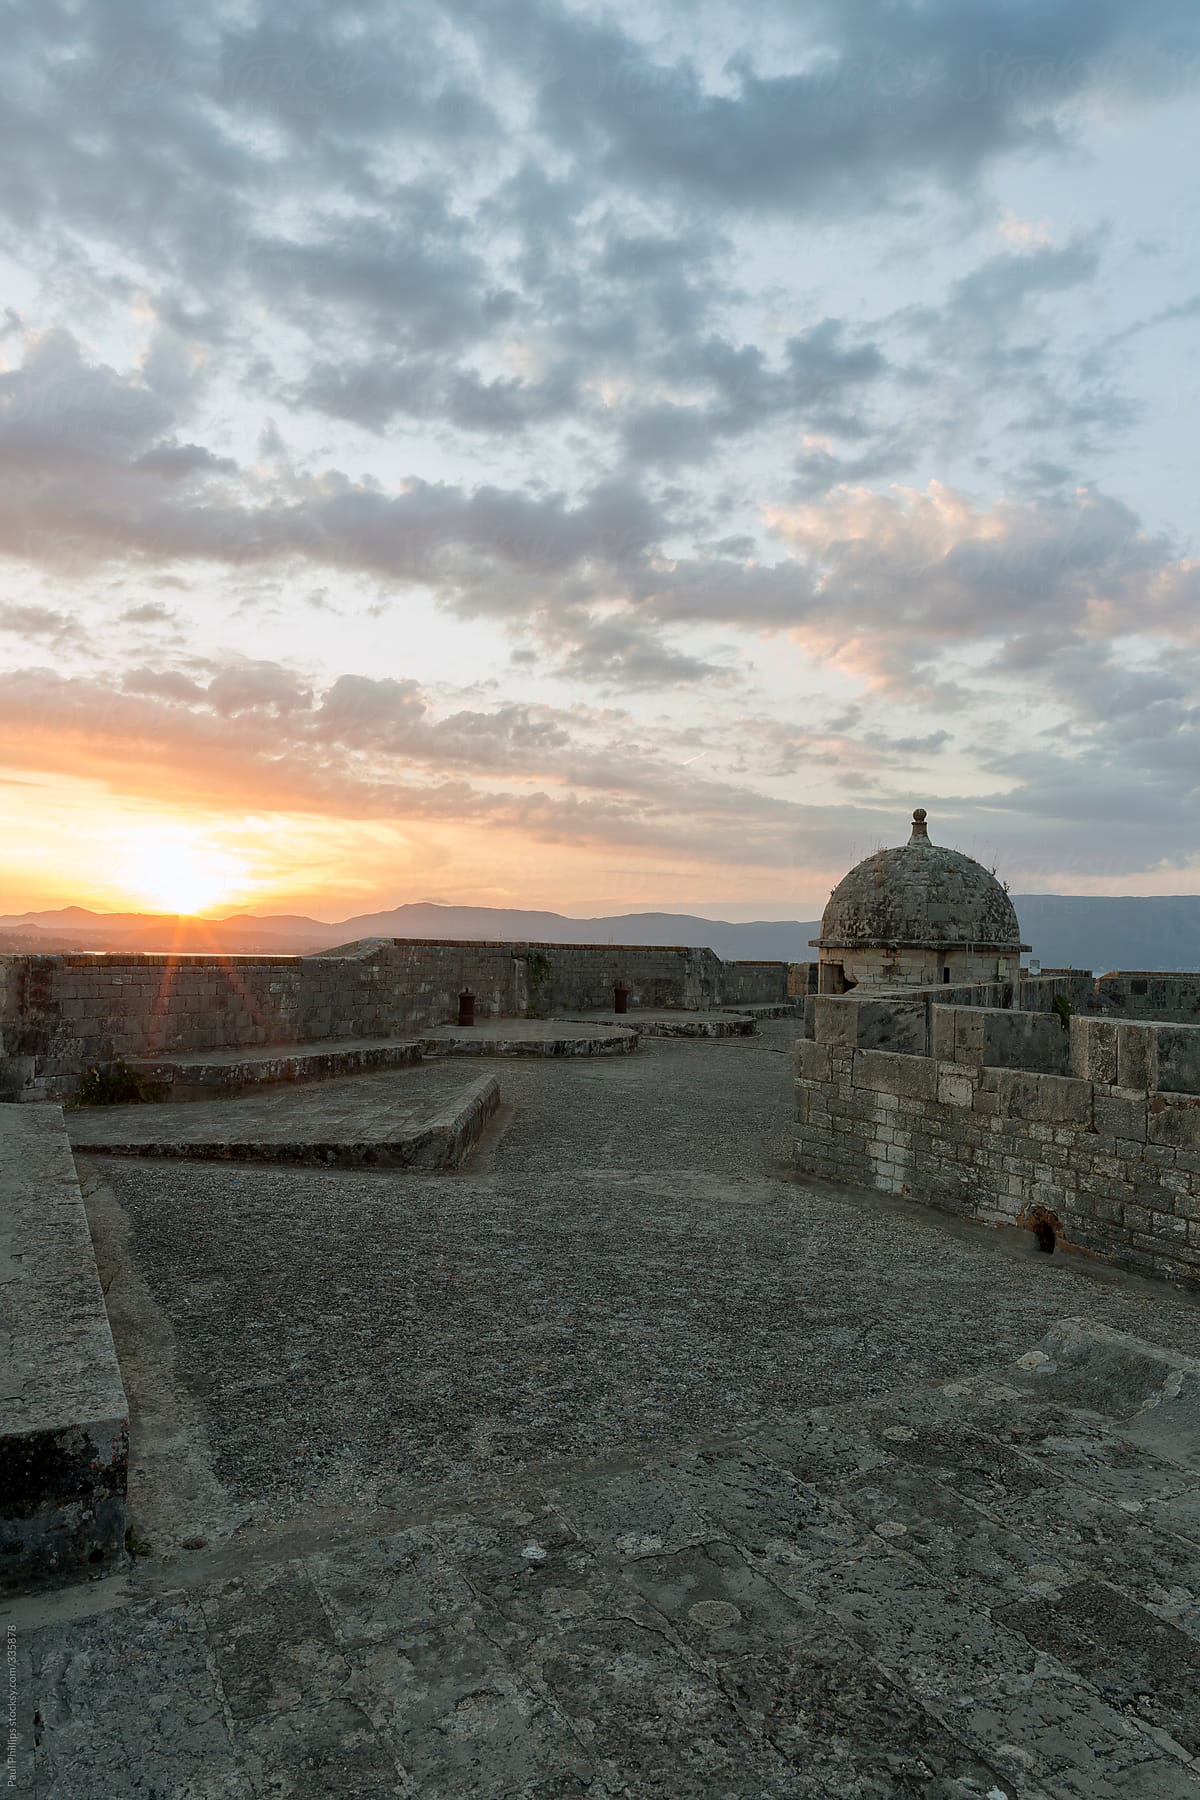 Sun setting over the battlements of an old fort